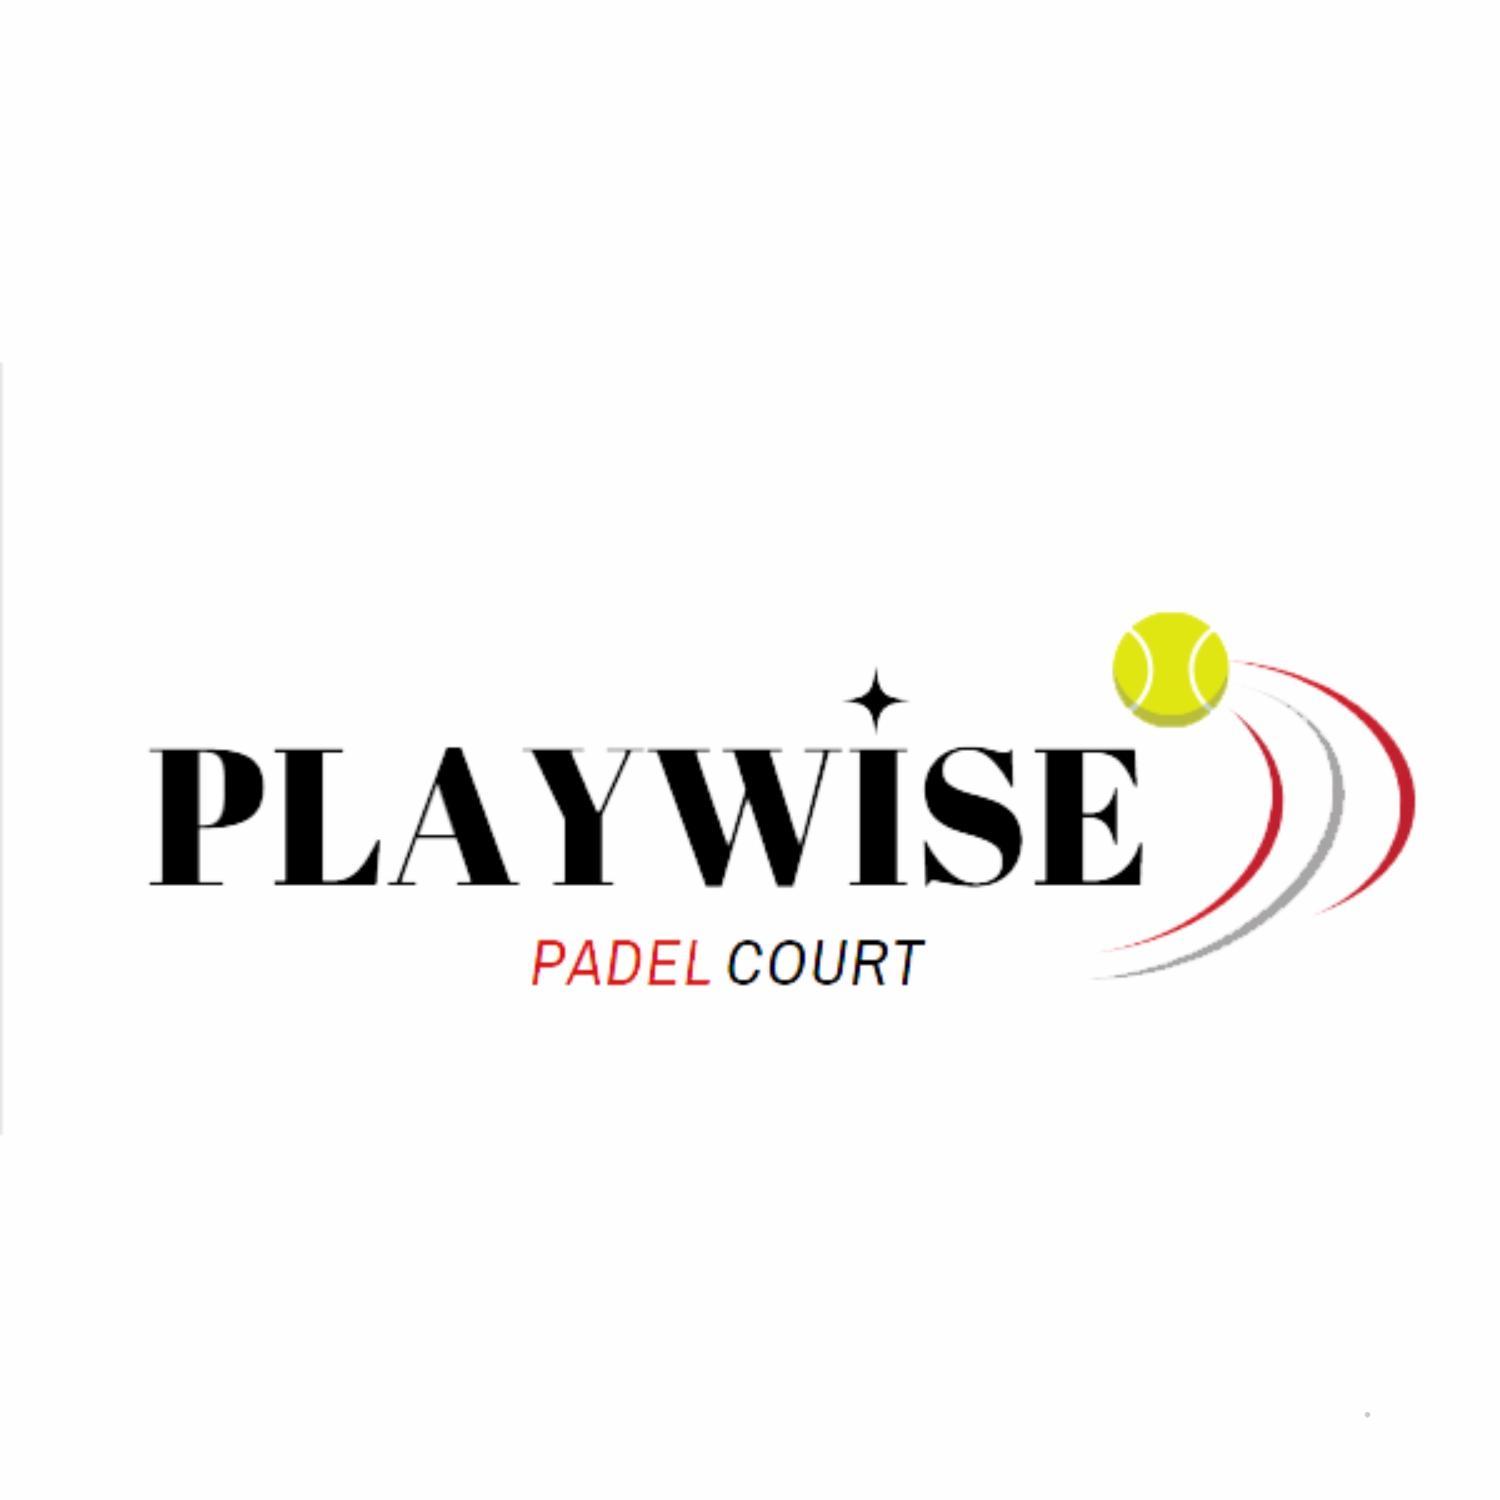 PLAYWISE PADEL COURTlogo